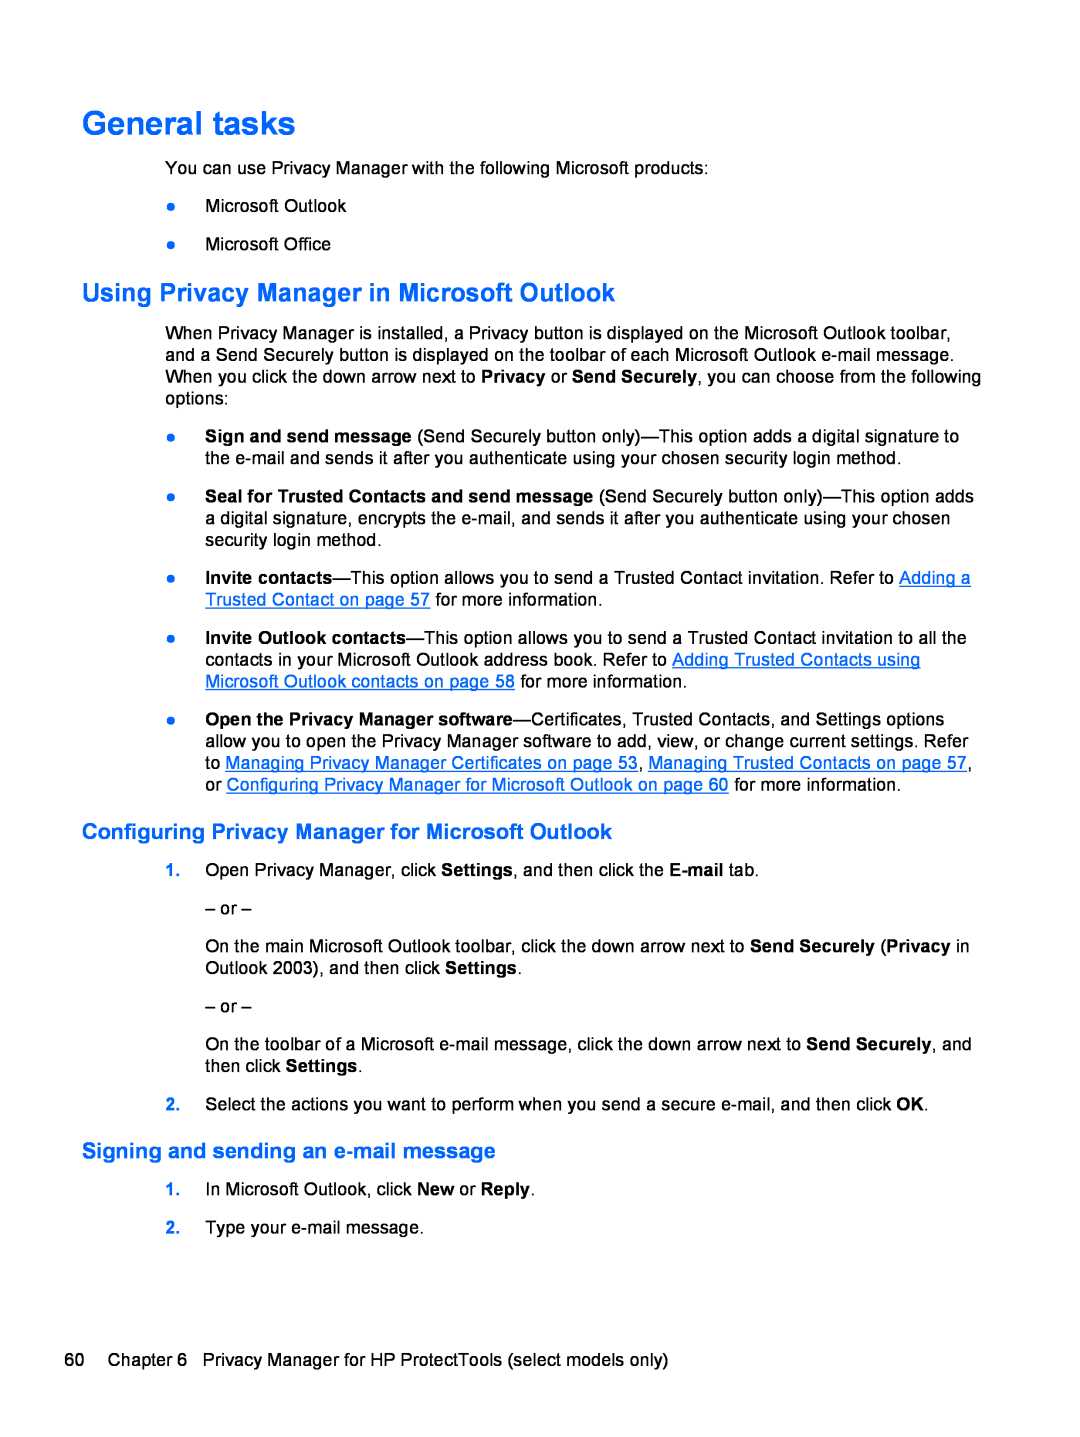 HP 2 Base Model manual Using Privacy Manager in Microsoft Outlook, Configuring Privacy Manager for Microsoft Outlook 